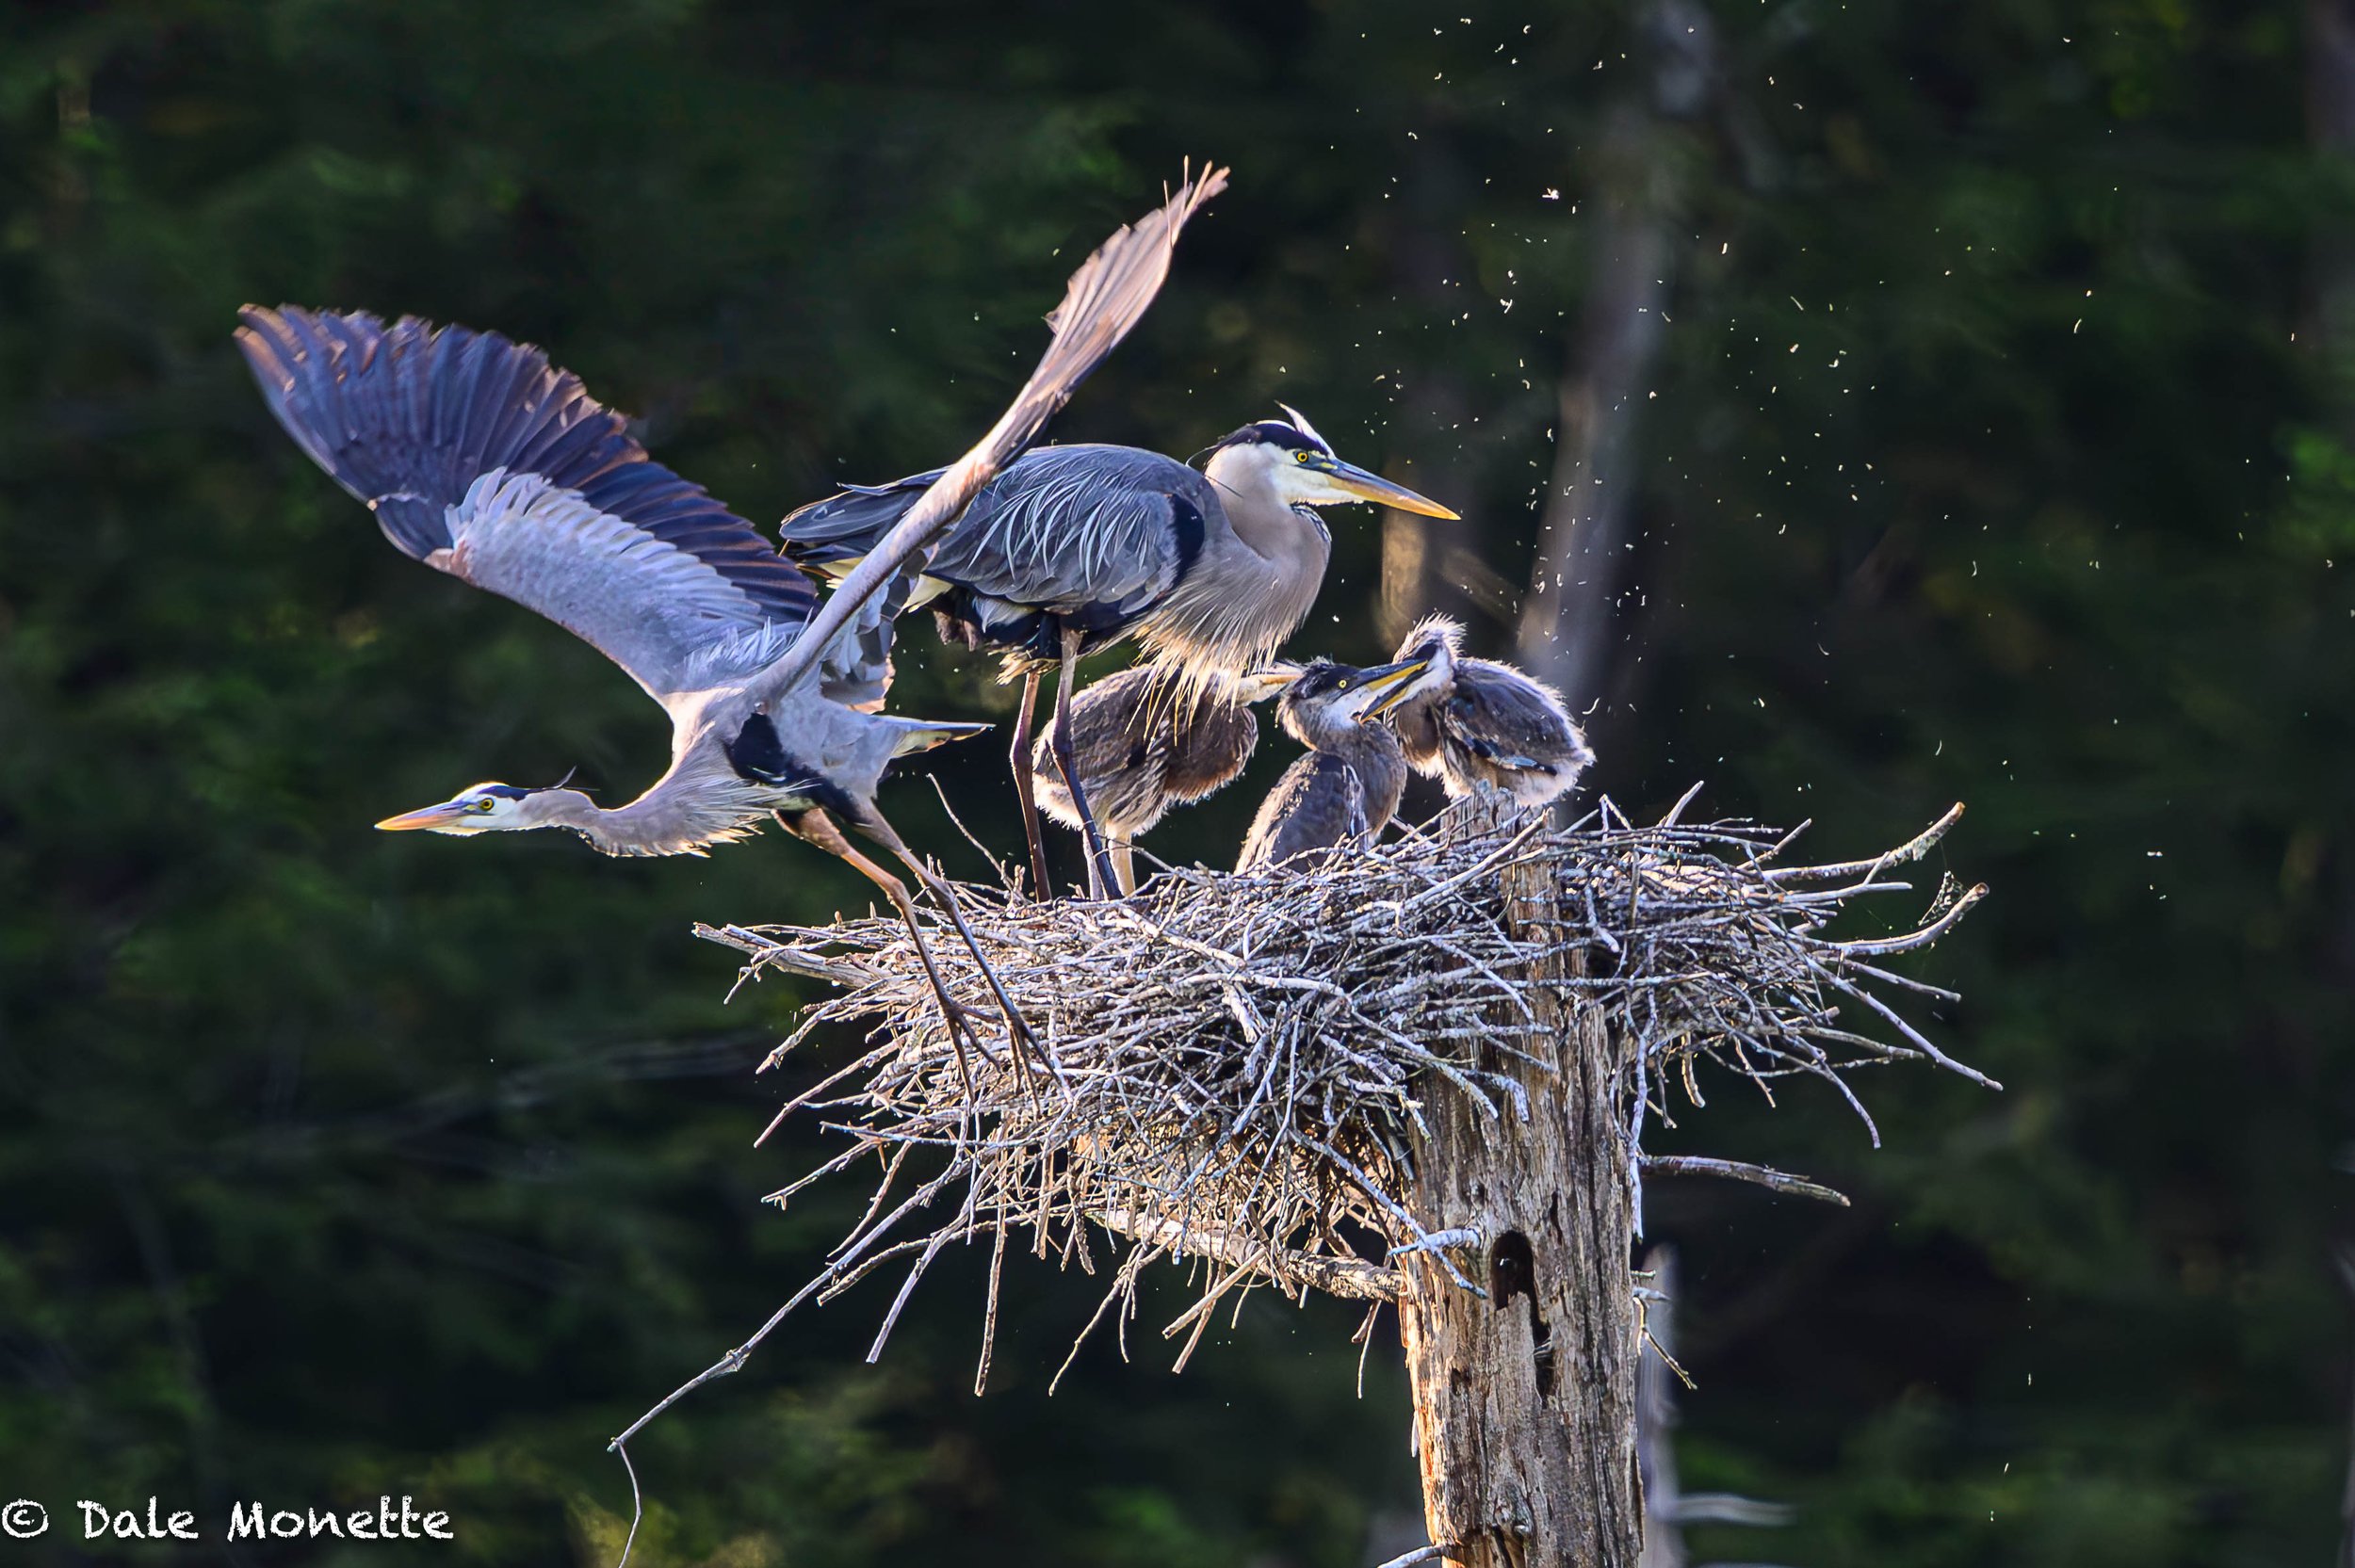   A quick nest change…15 seconds for one adult loaded down with food in its gullet for the chicks, and the attending adult to blast off in a flash of feathers and dust back to the ponds.  